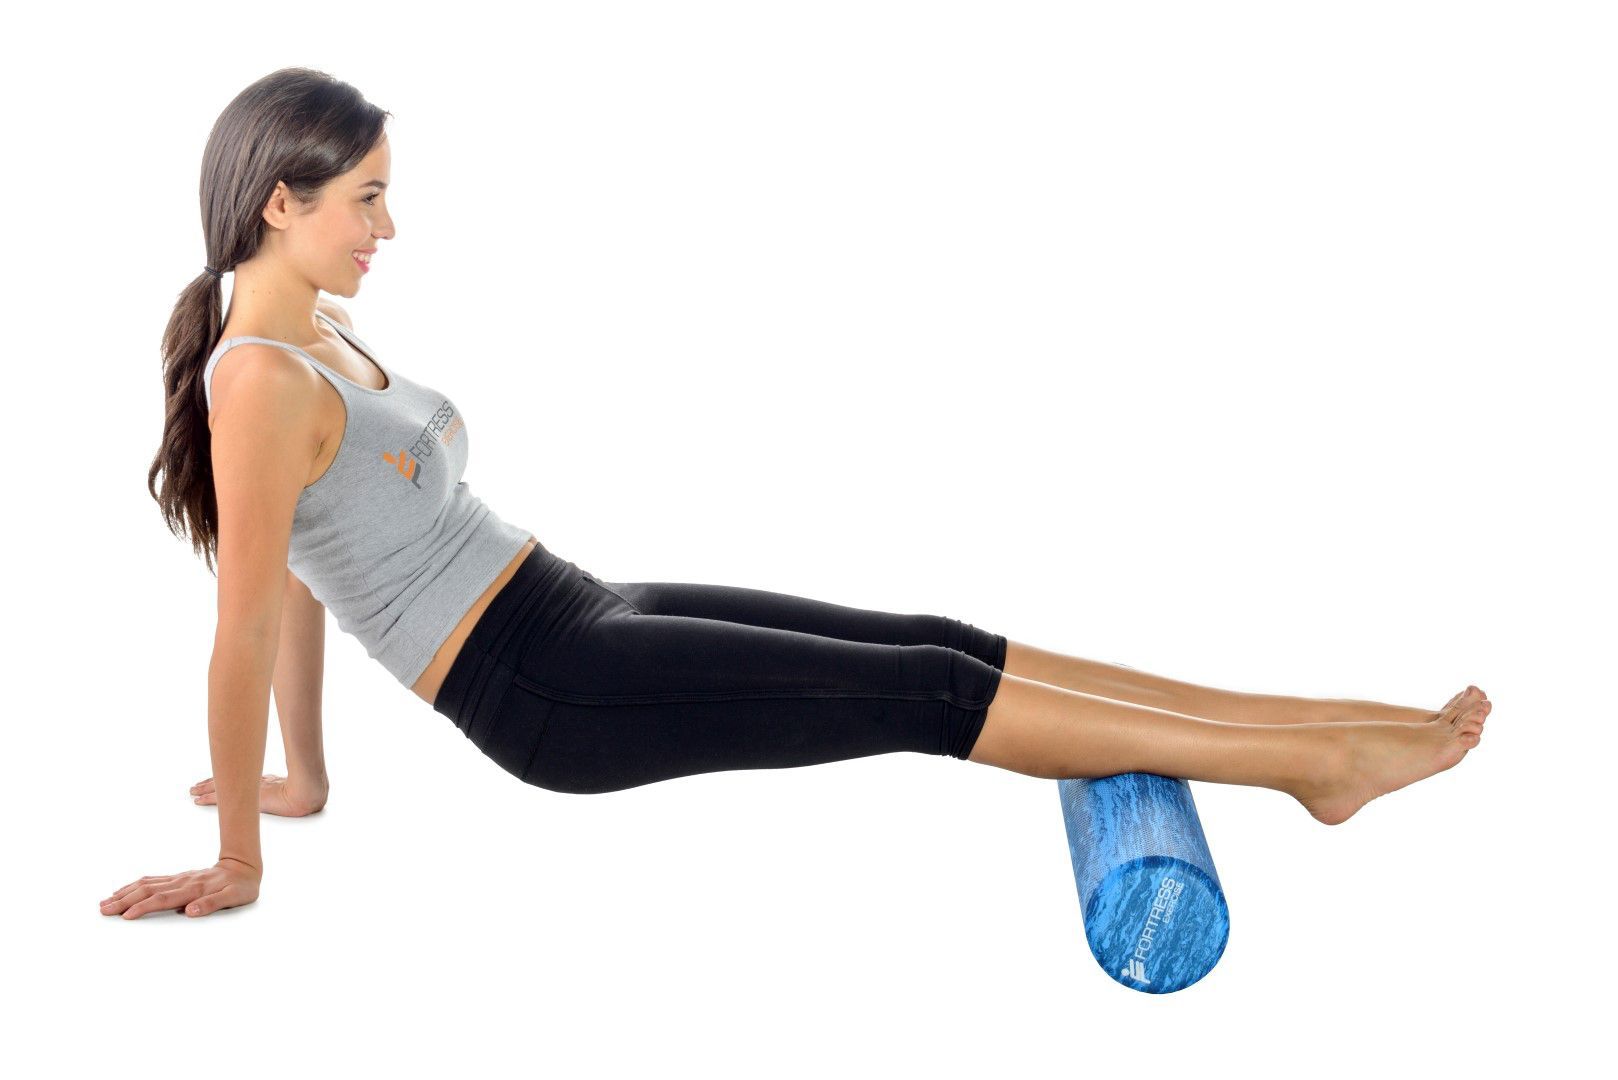 Broaden Your Exercise Options with Fortress Foam Rollers